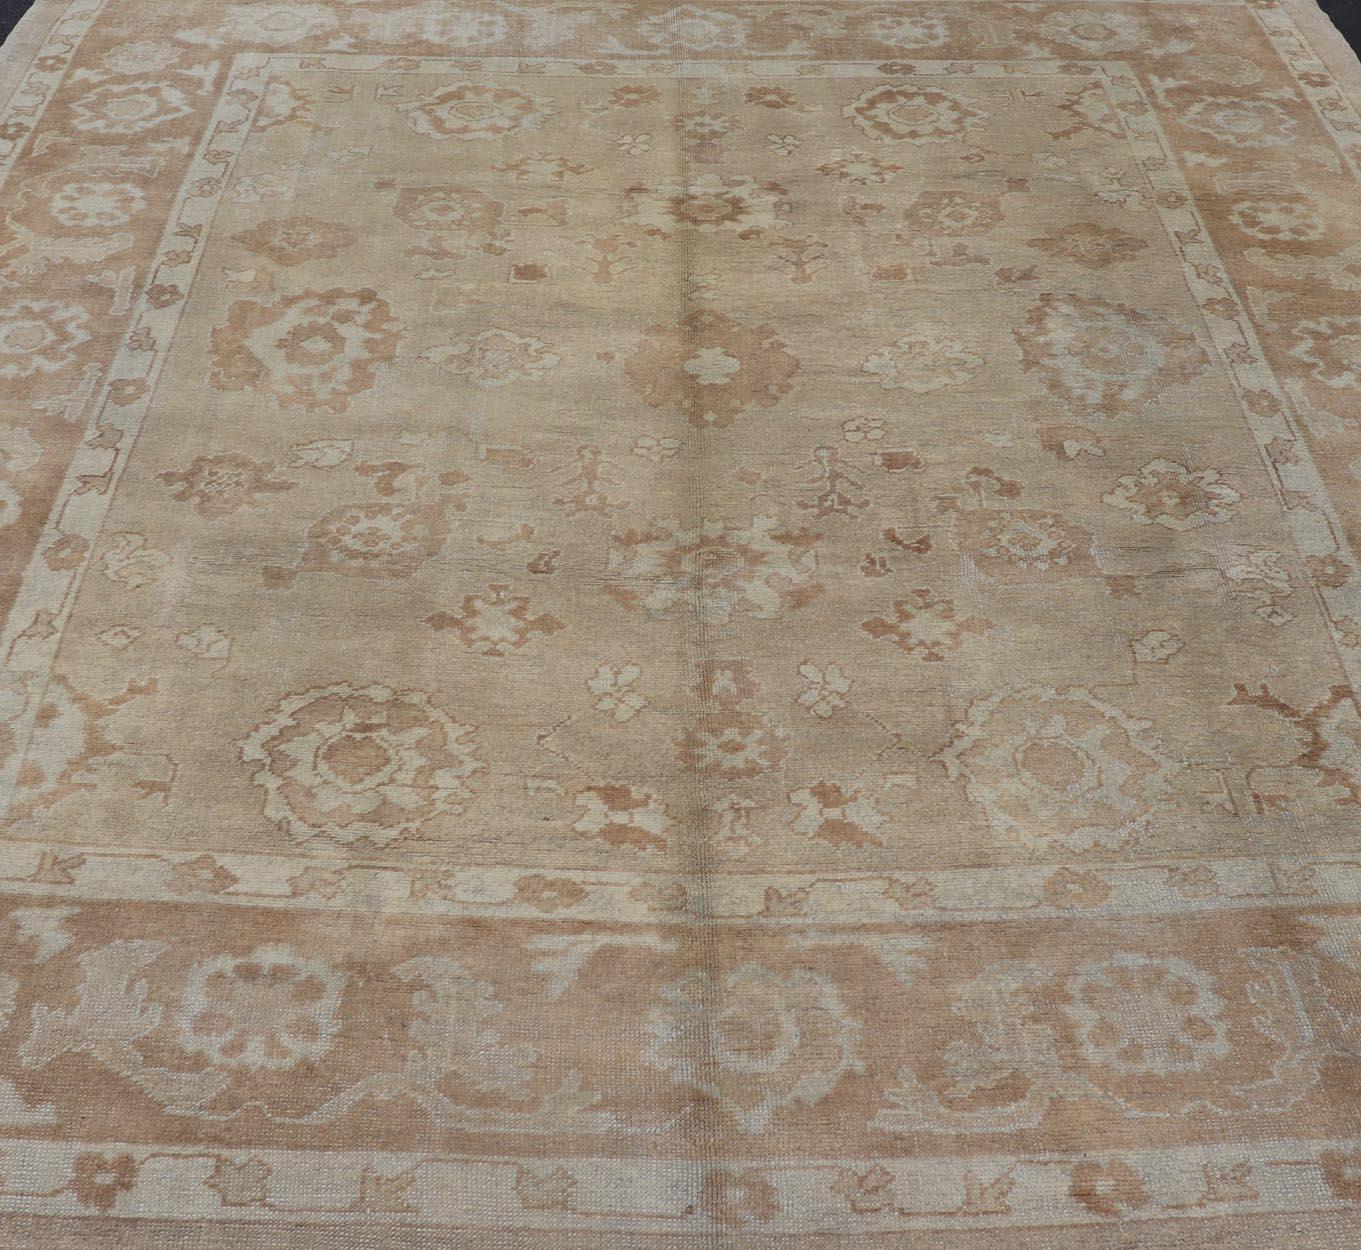 Neutral Colors Vintage Angora Oushak Turkish Rug in Light Brown and Cream 2